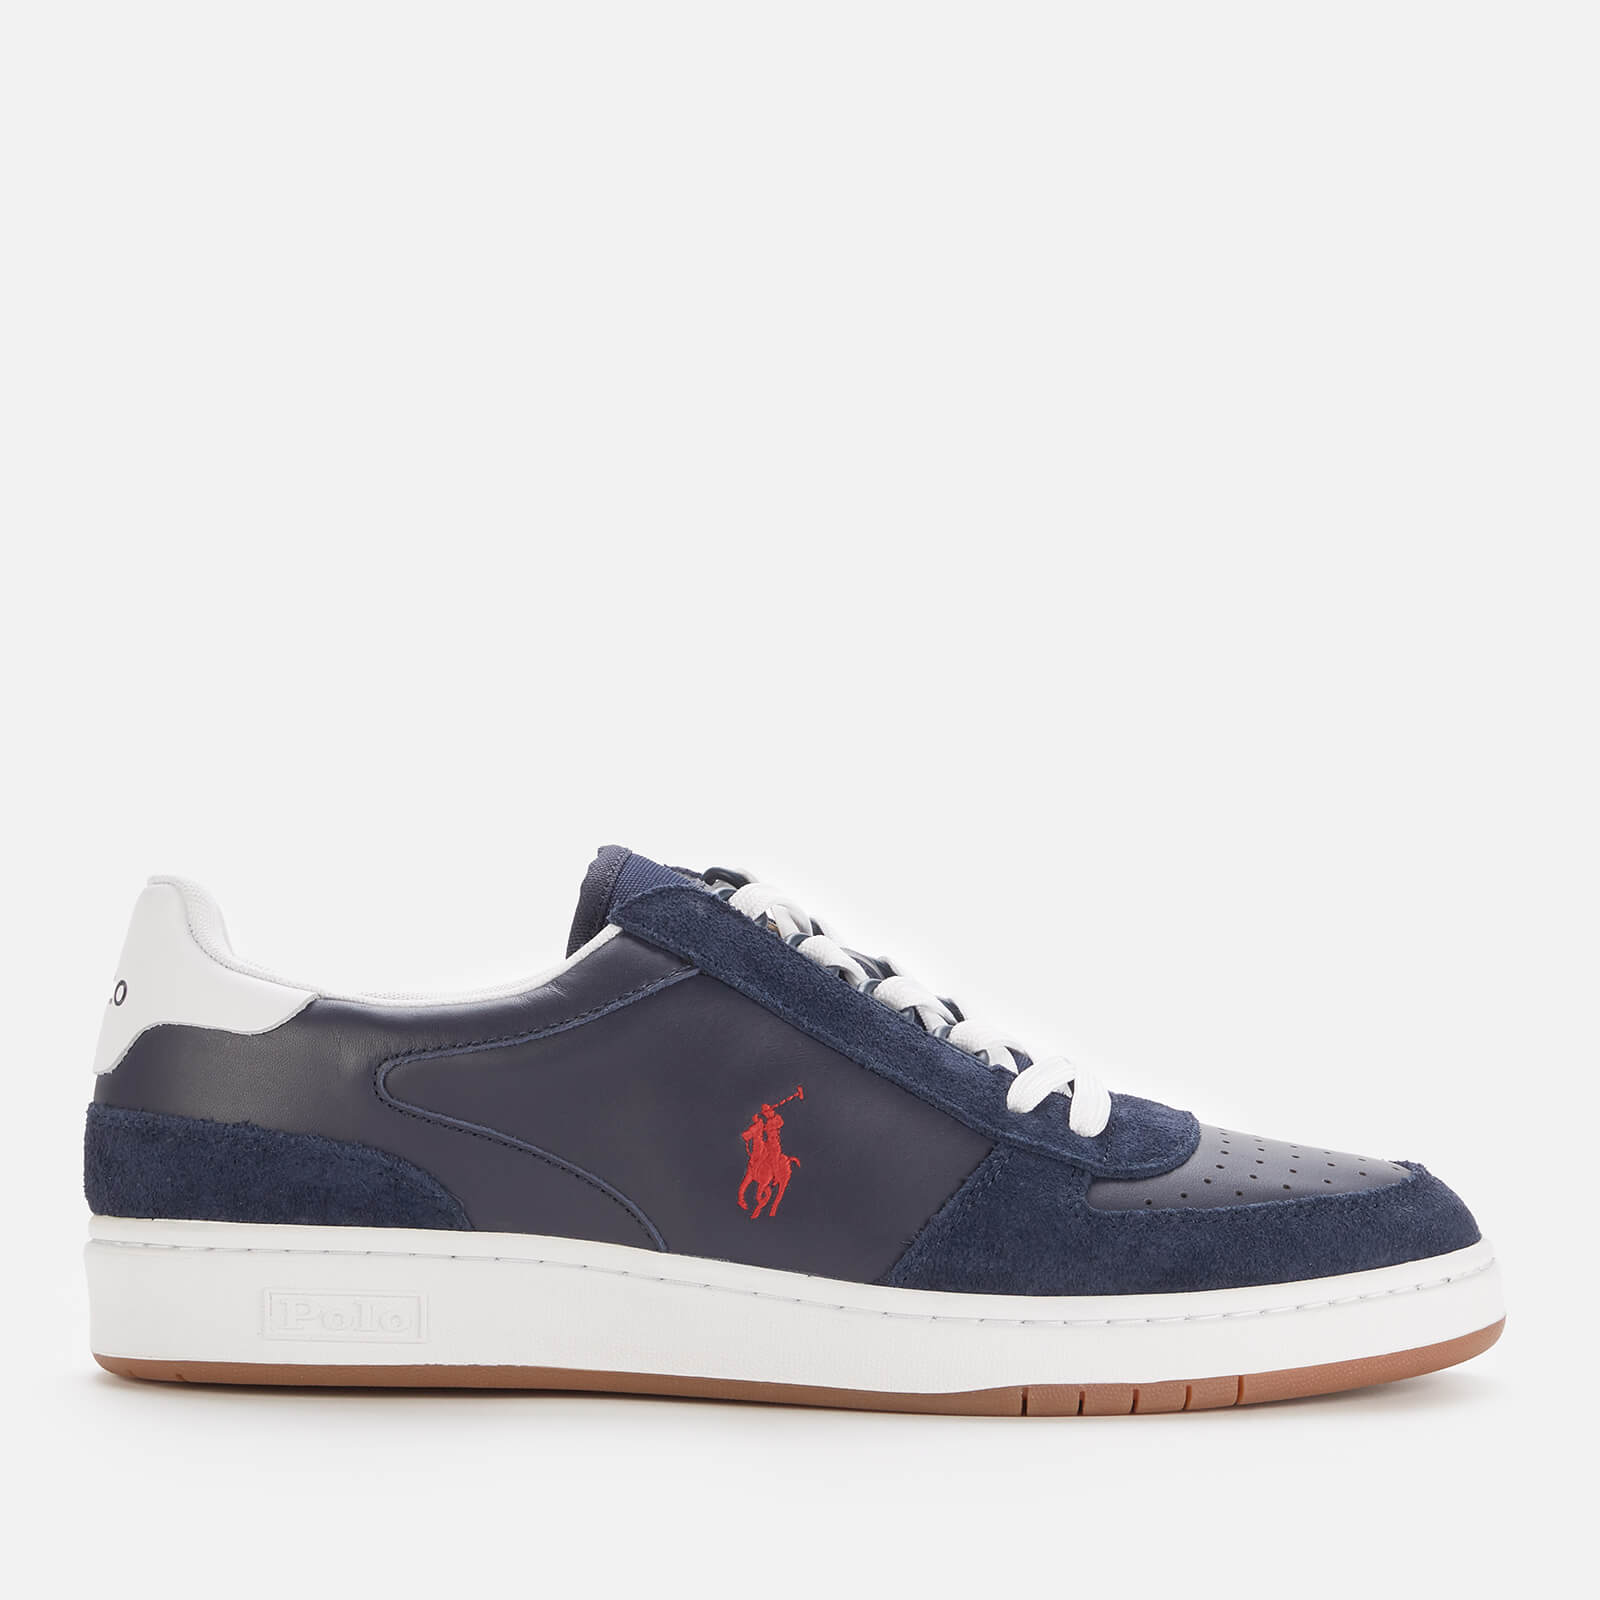 Polo Ralph Lauren Men's Polo Court Leather/Suede Trainers - Newport Navy/RL2000 Red - UK 10